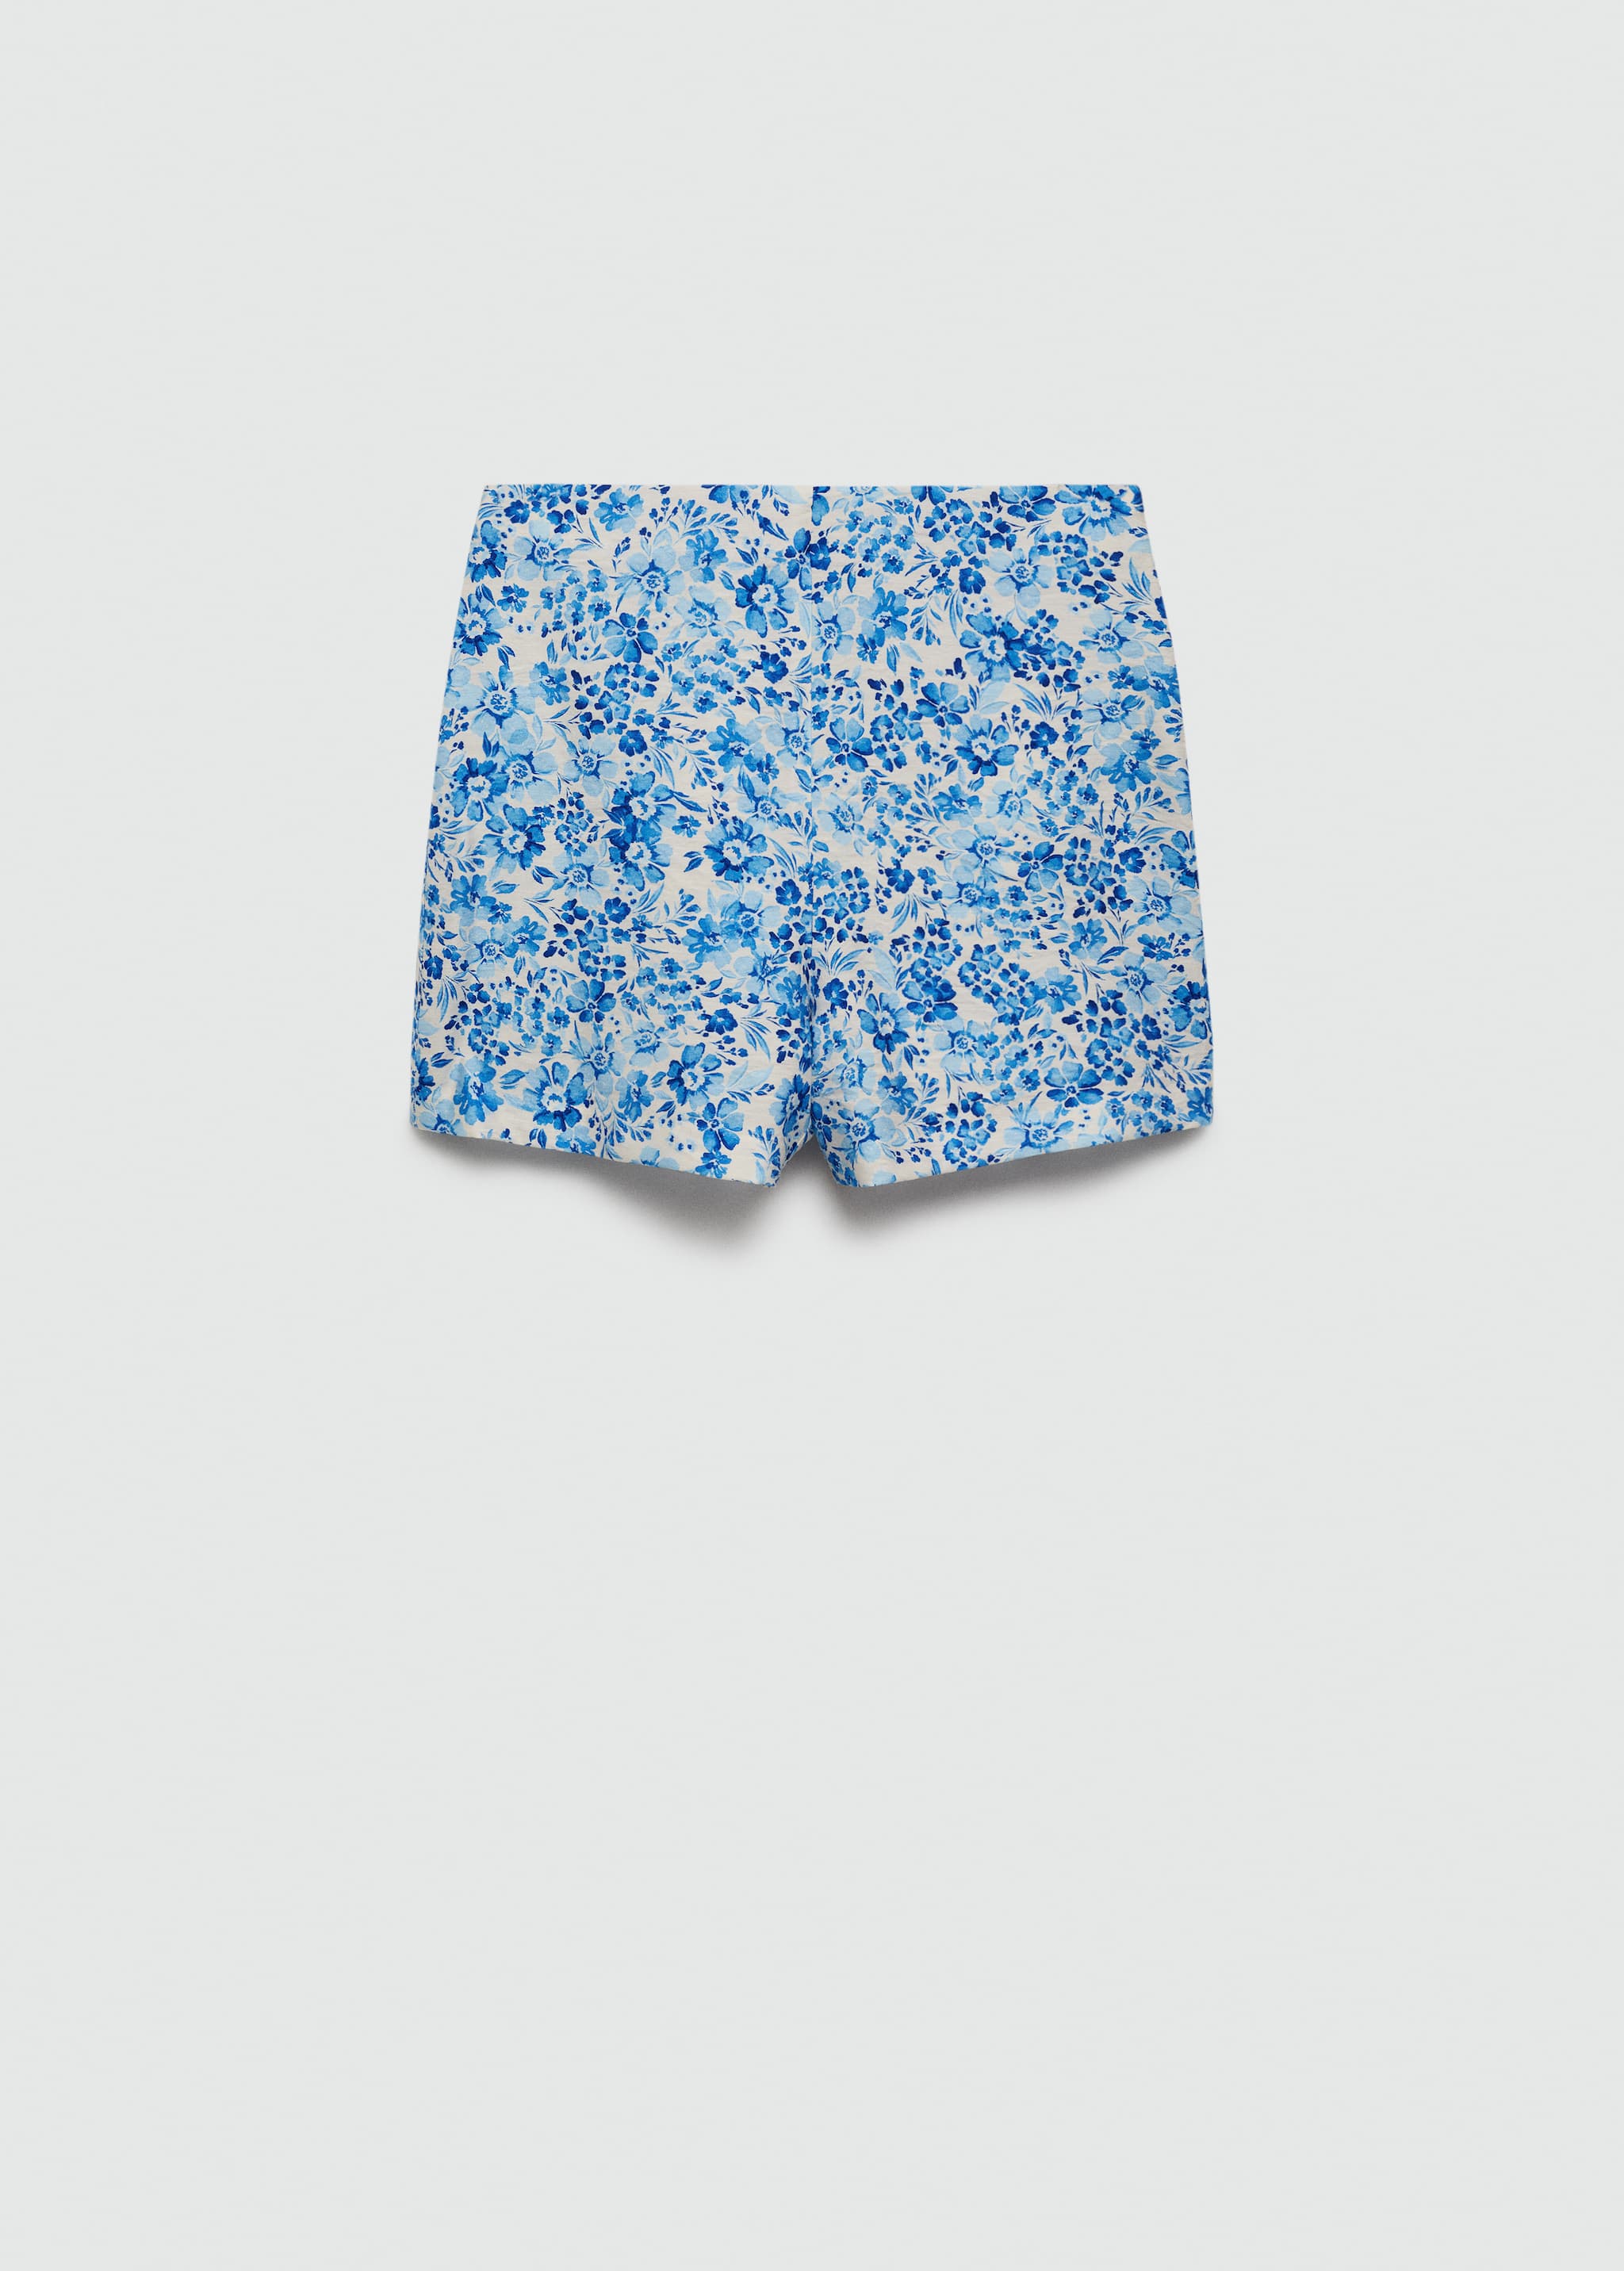 Straight shorts floral print - Article without model